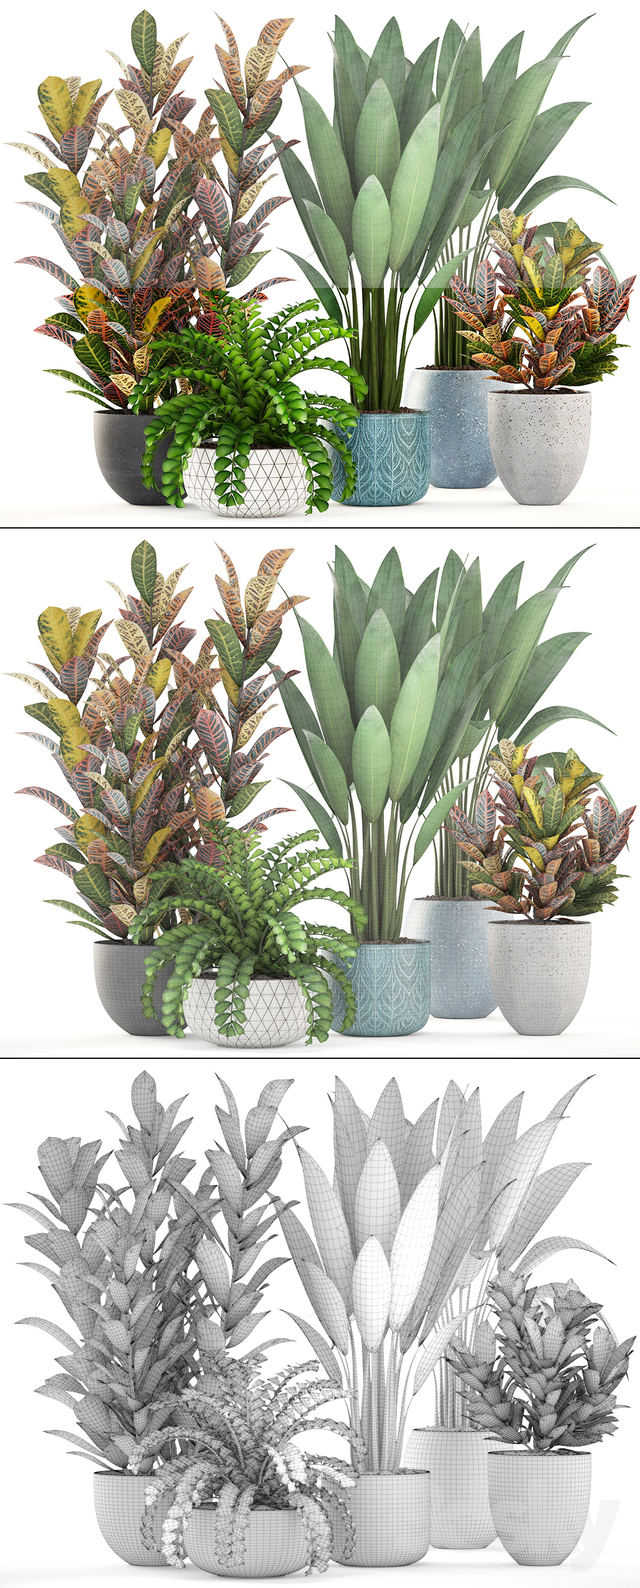 Collection of plants.